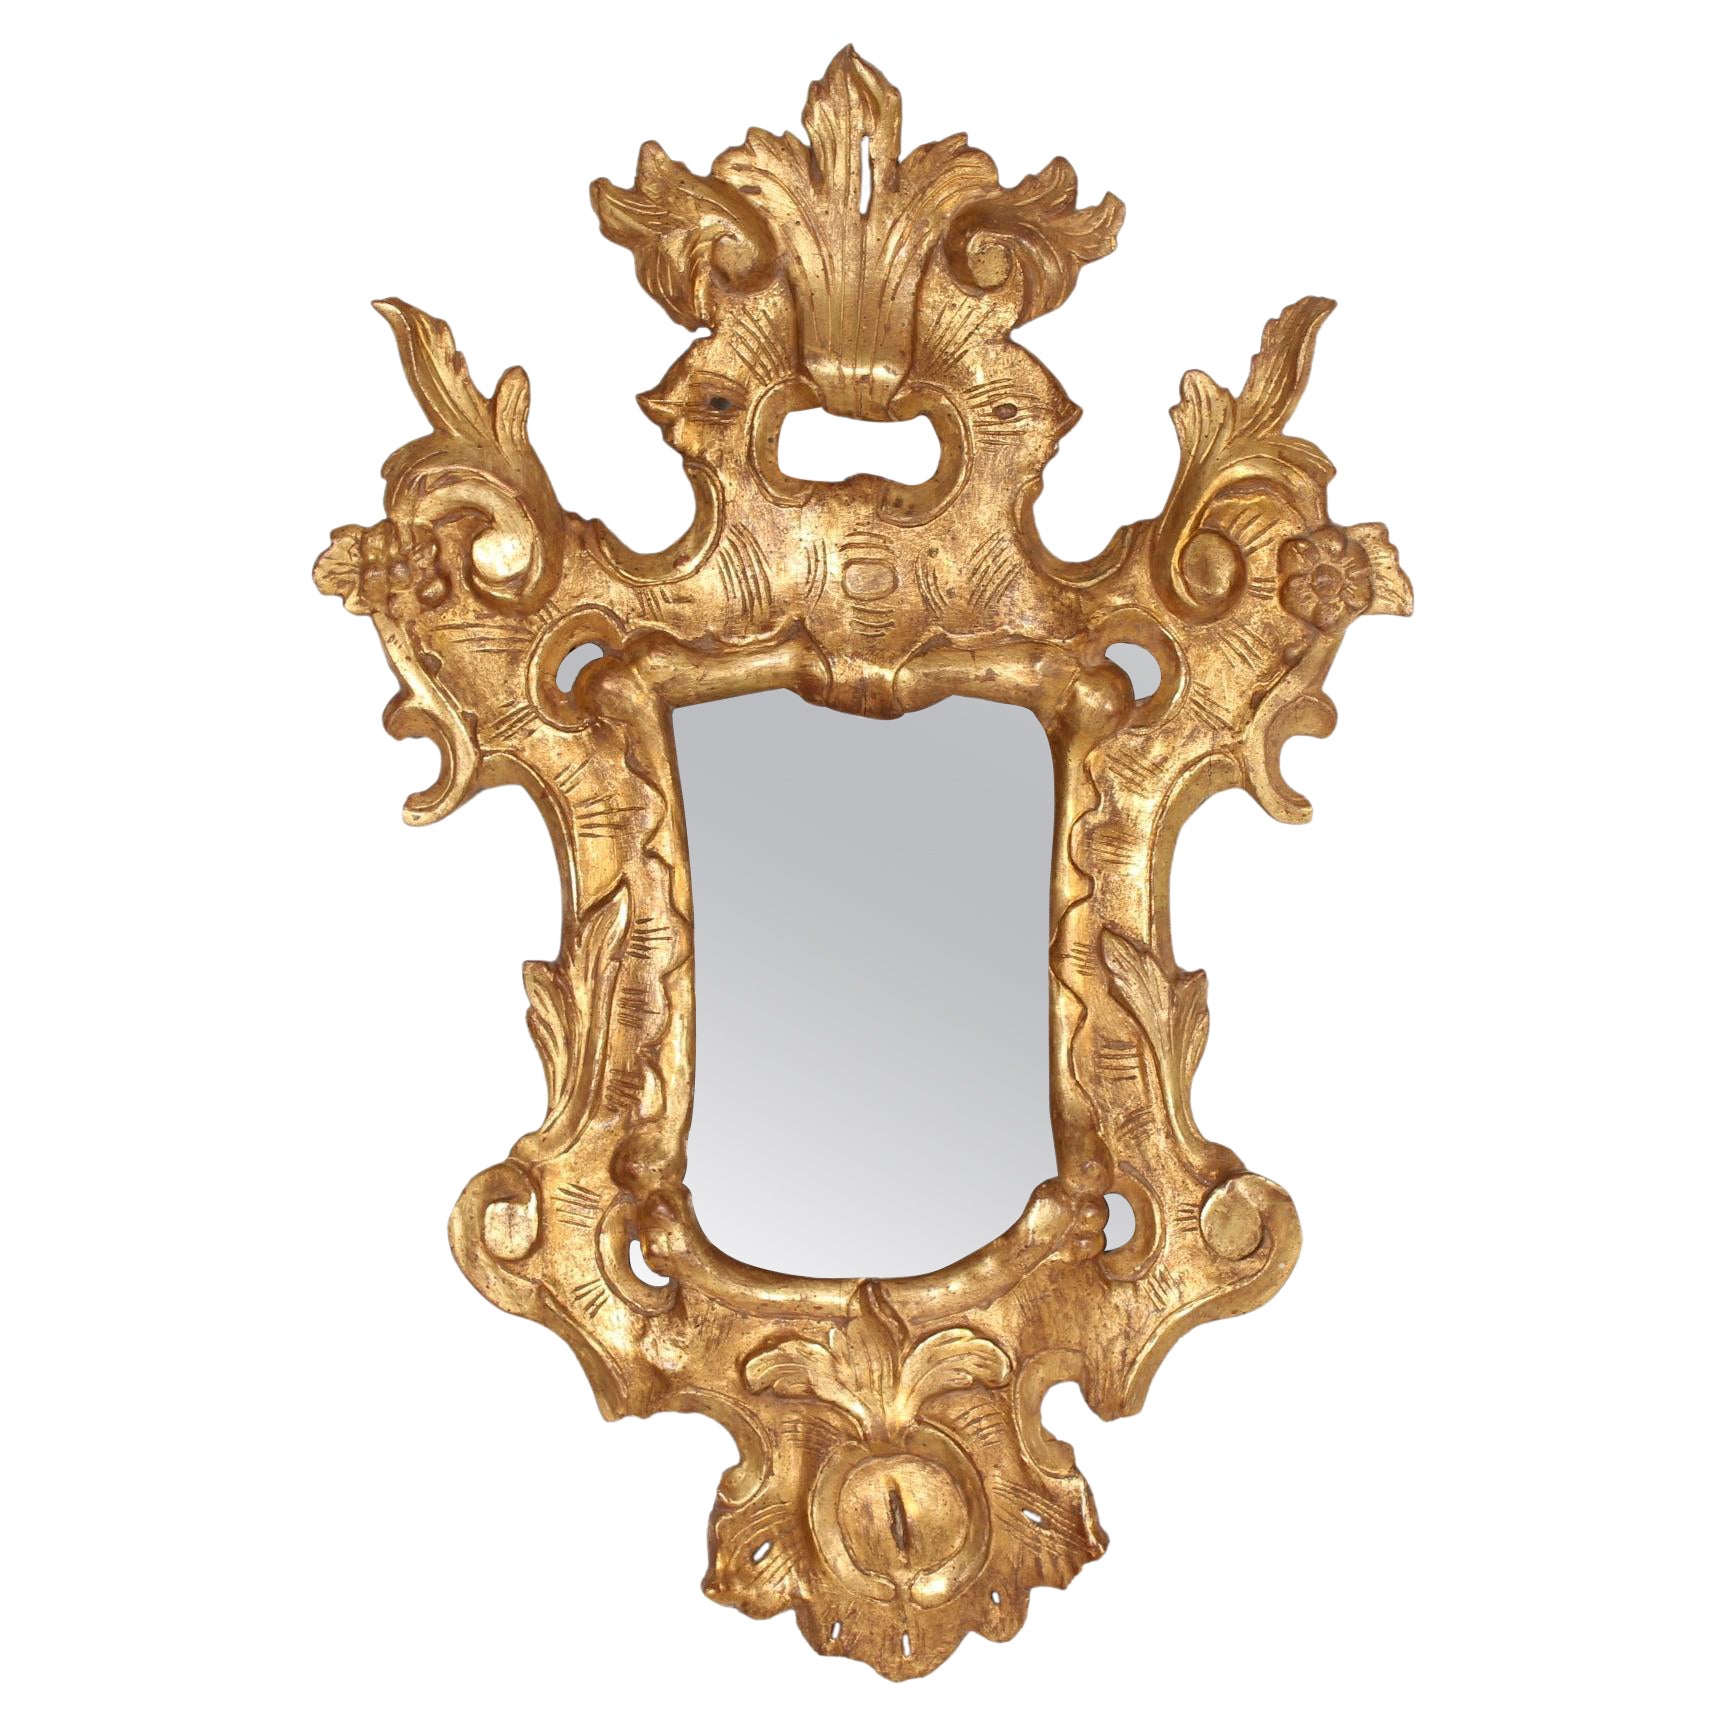 European Rococo Giltwood Mirror with Openwork Ornaments + Old Mirror Glass 1800s For Sale